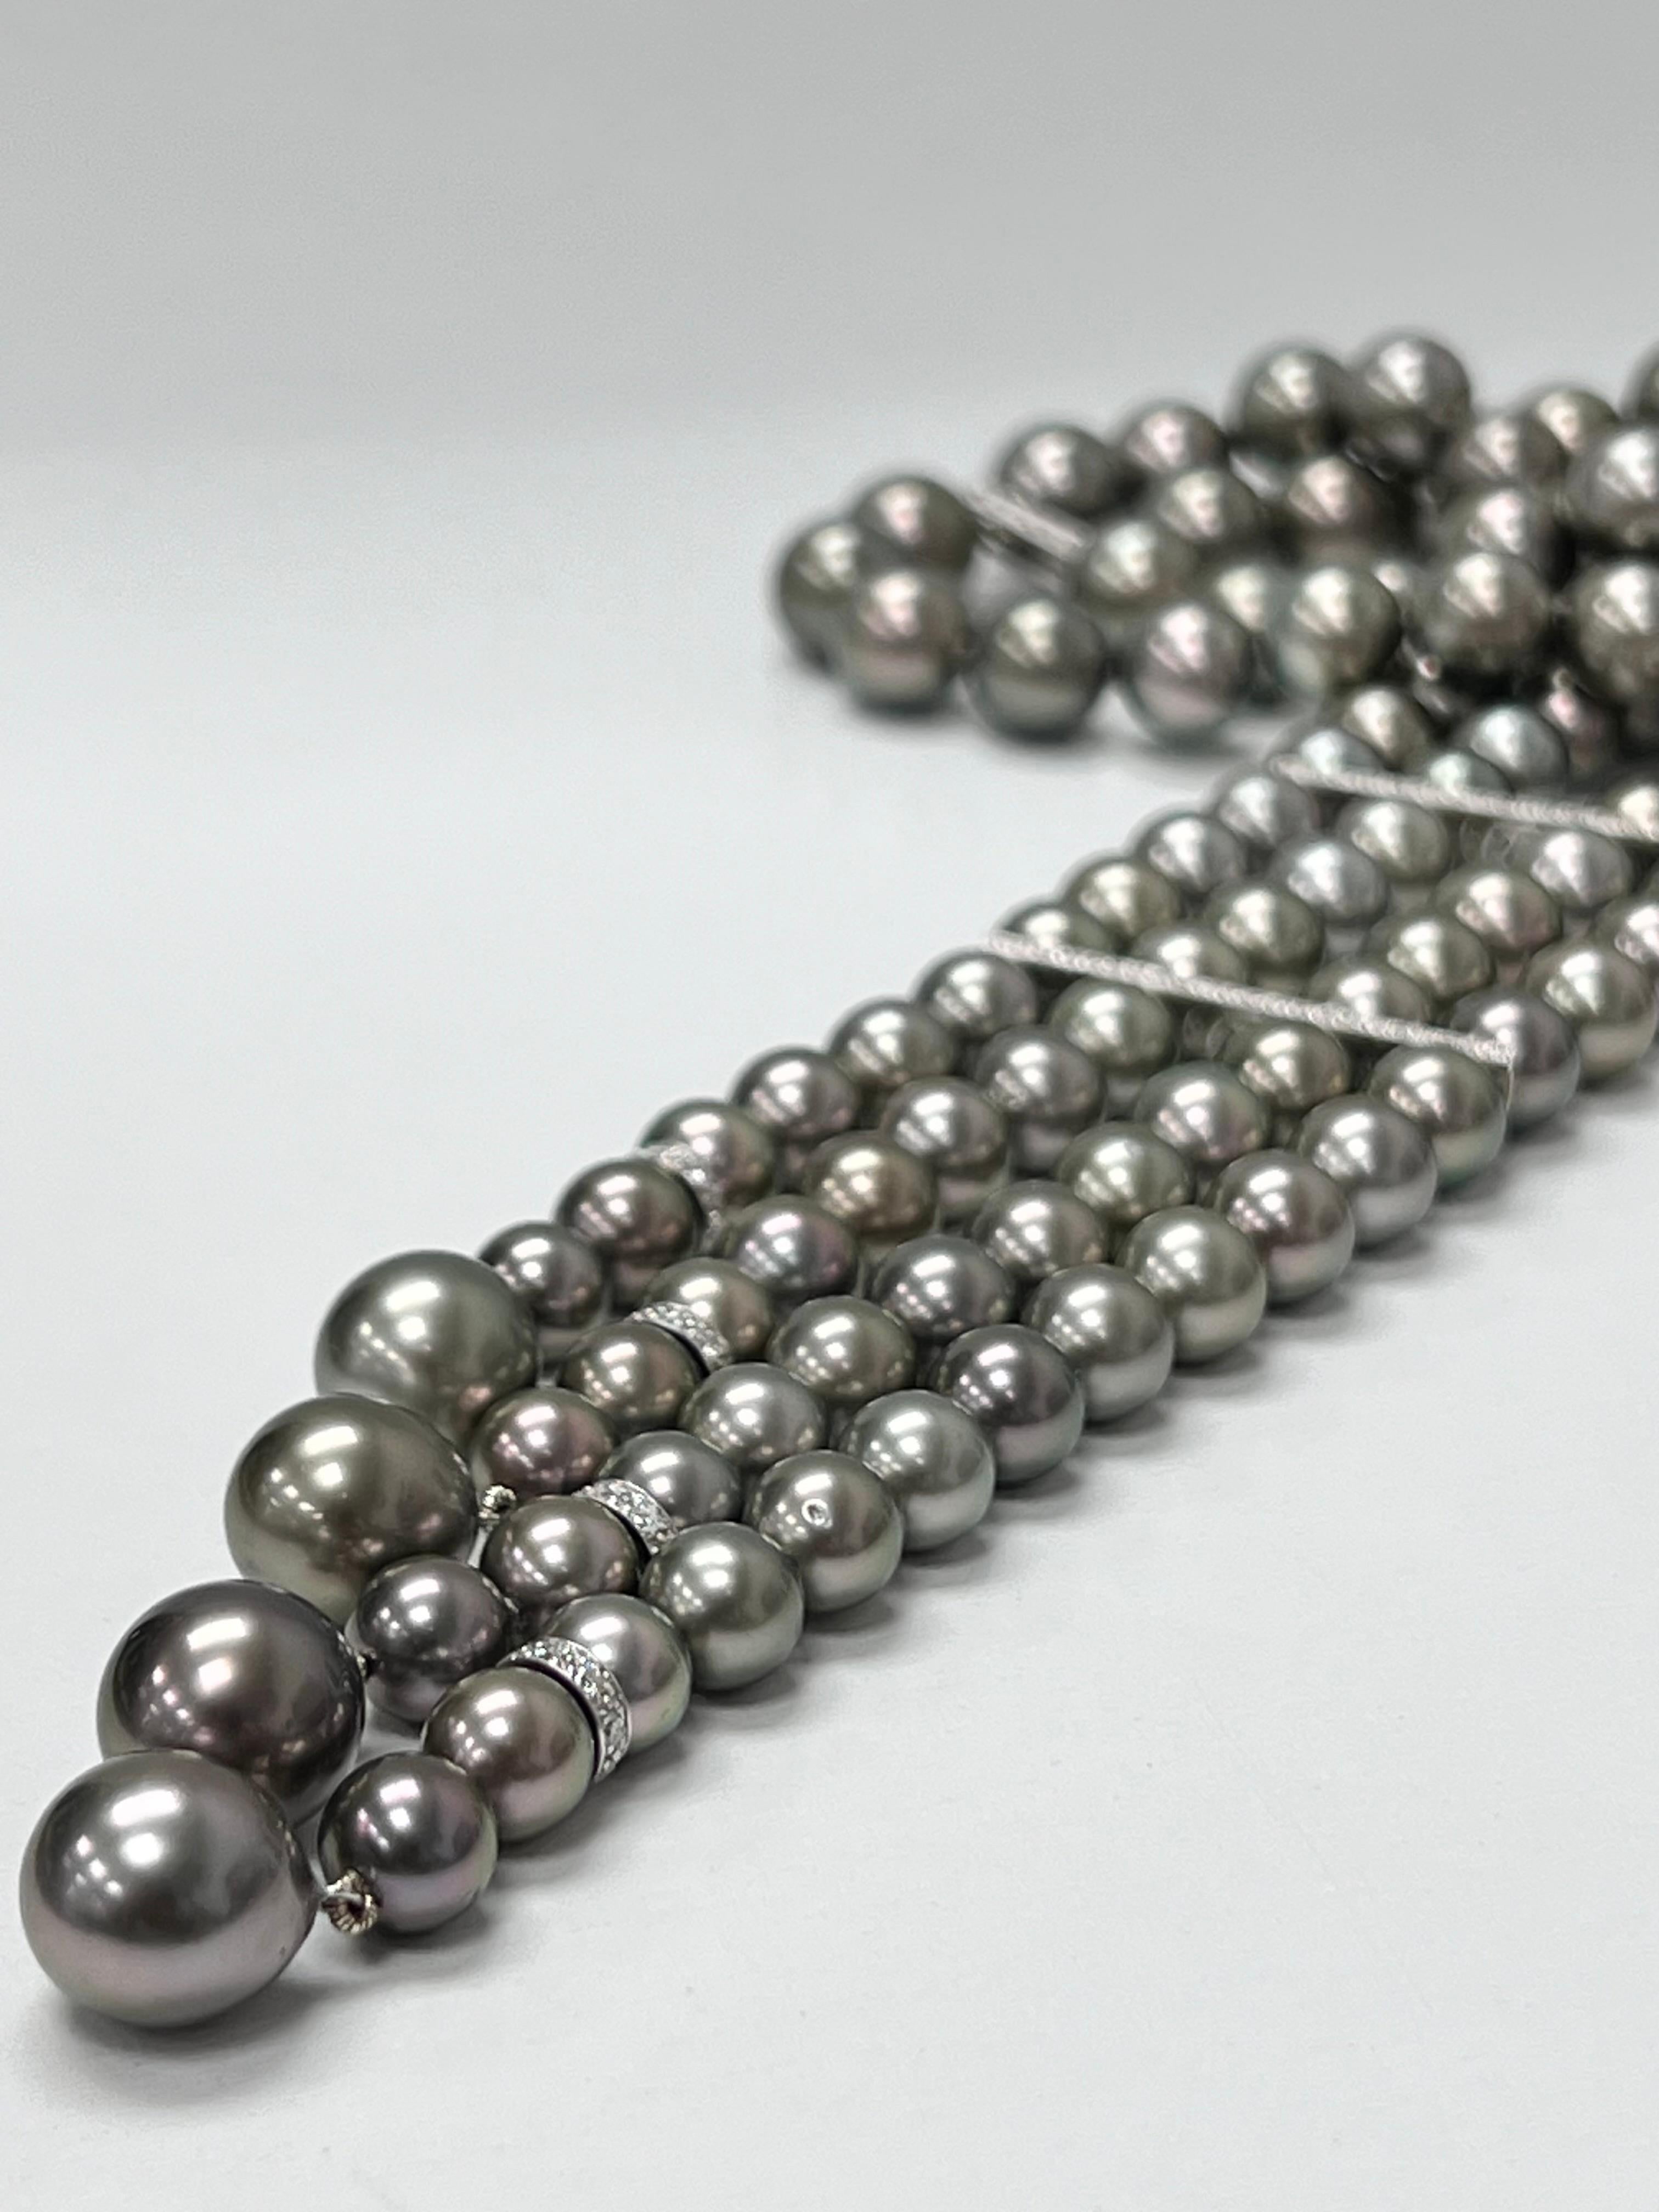 Style and glamour are in the spotlight with this exquisite Tahitian and Diamond necklace. This 18-karat round-cut necklace is made from 168 pearls with a diamond bar clasp. The size of the pearls is 8 - 11 mm. The length of this necklace is 26